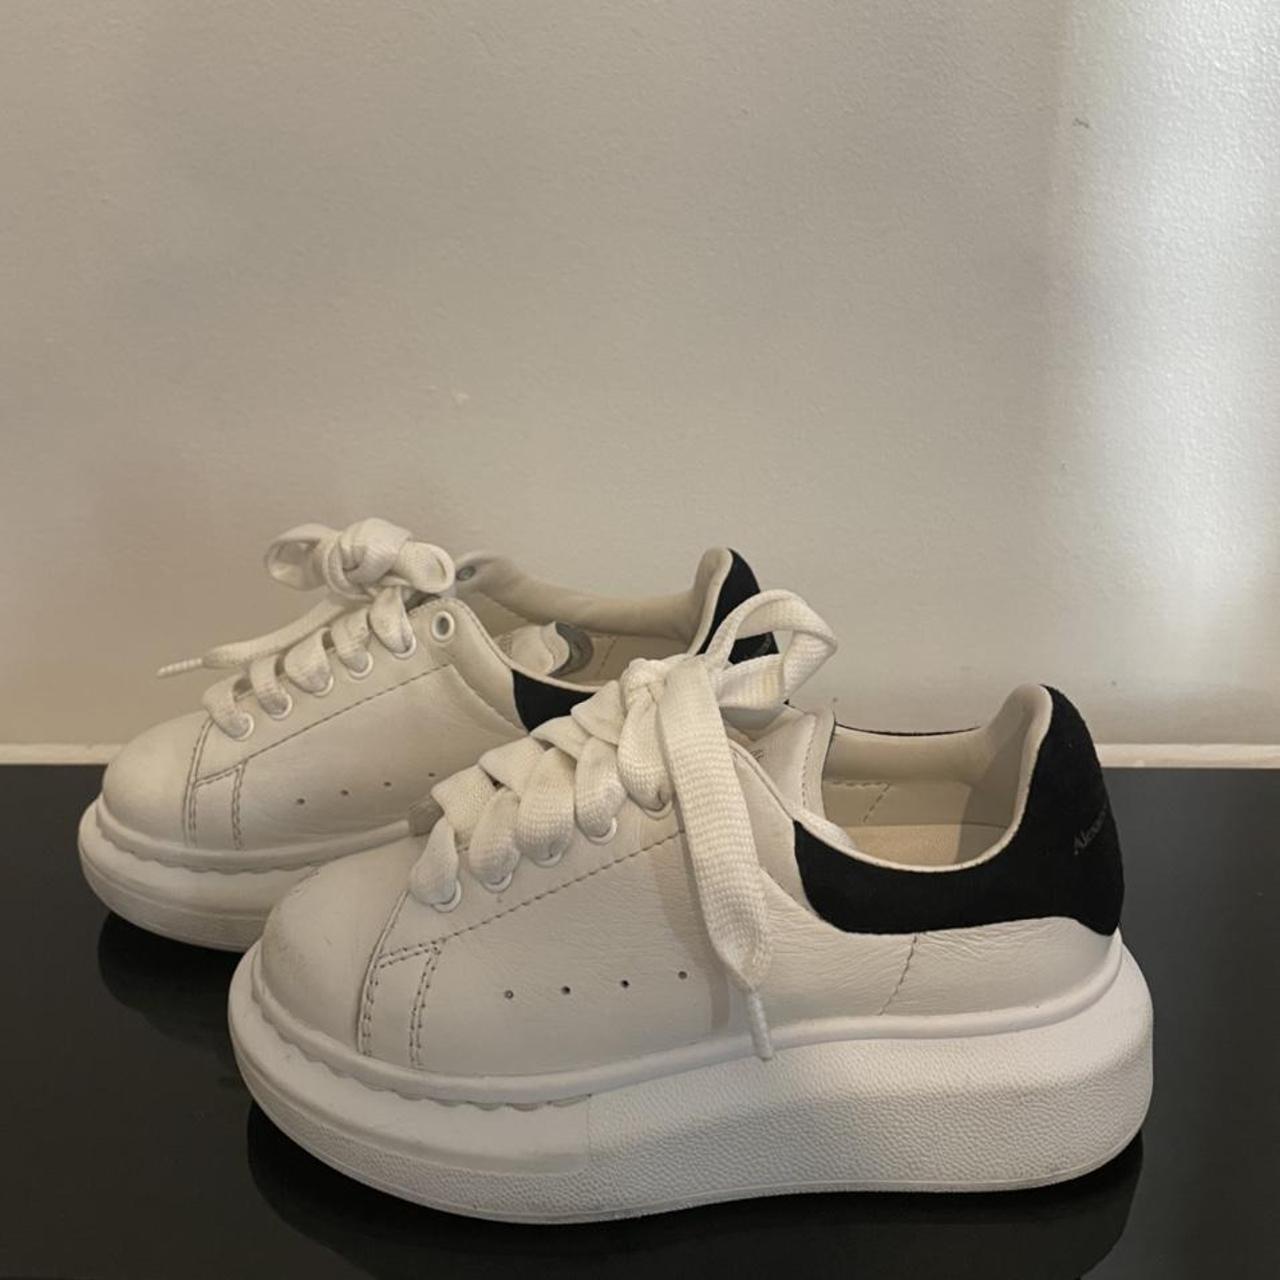 Alexander McQueen White and Black Trainers | Depop